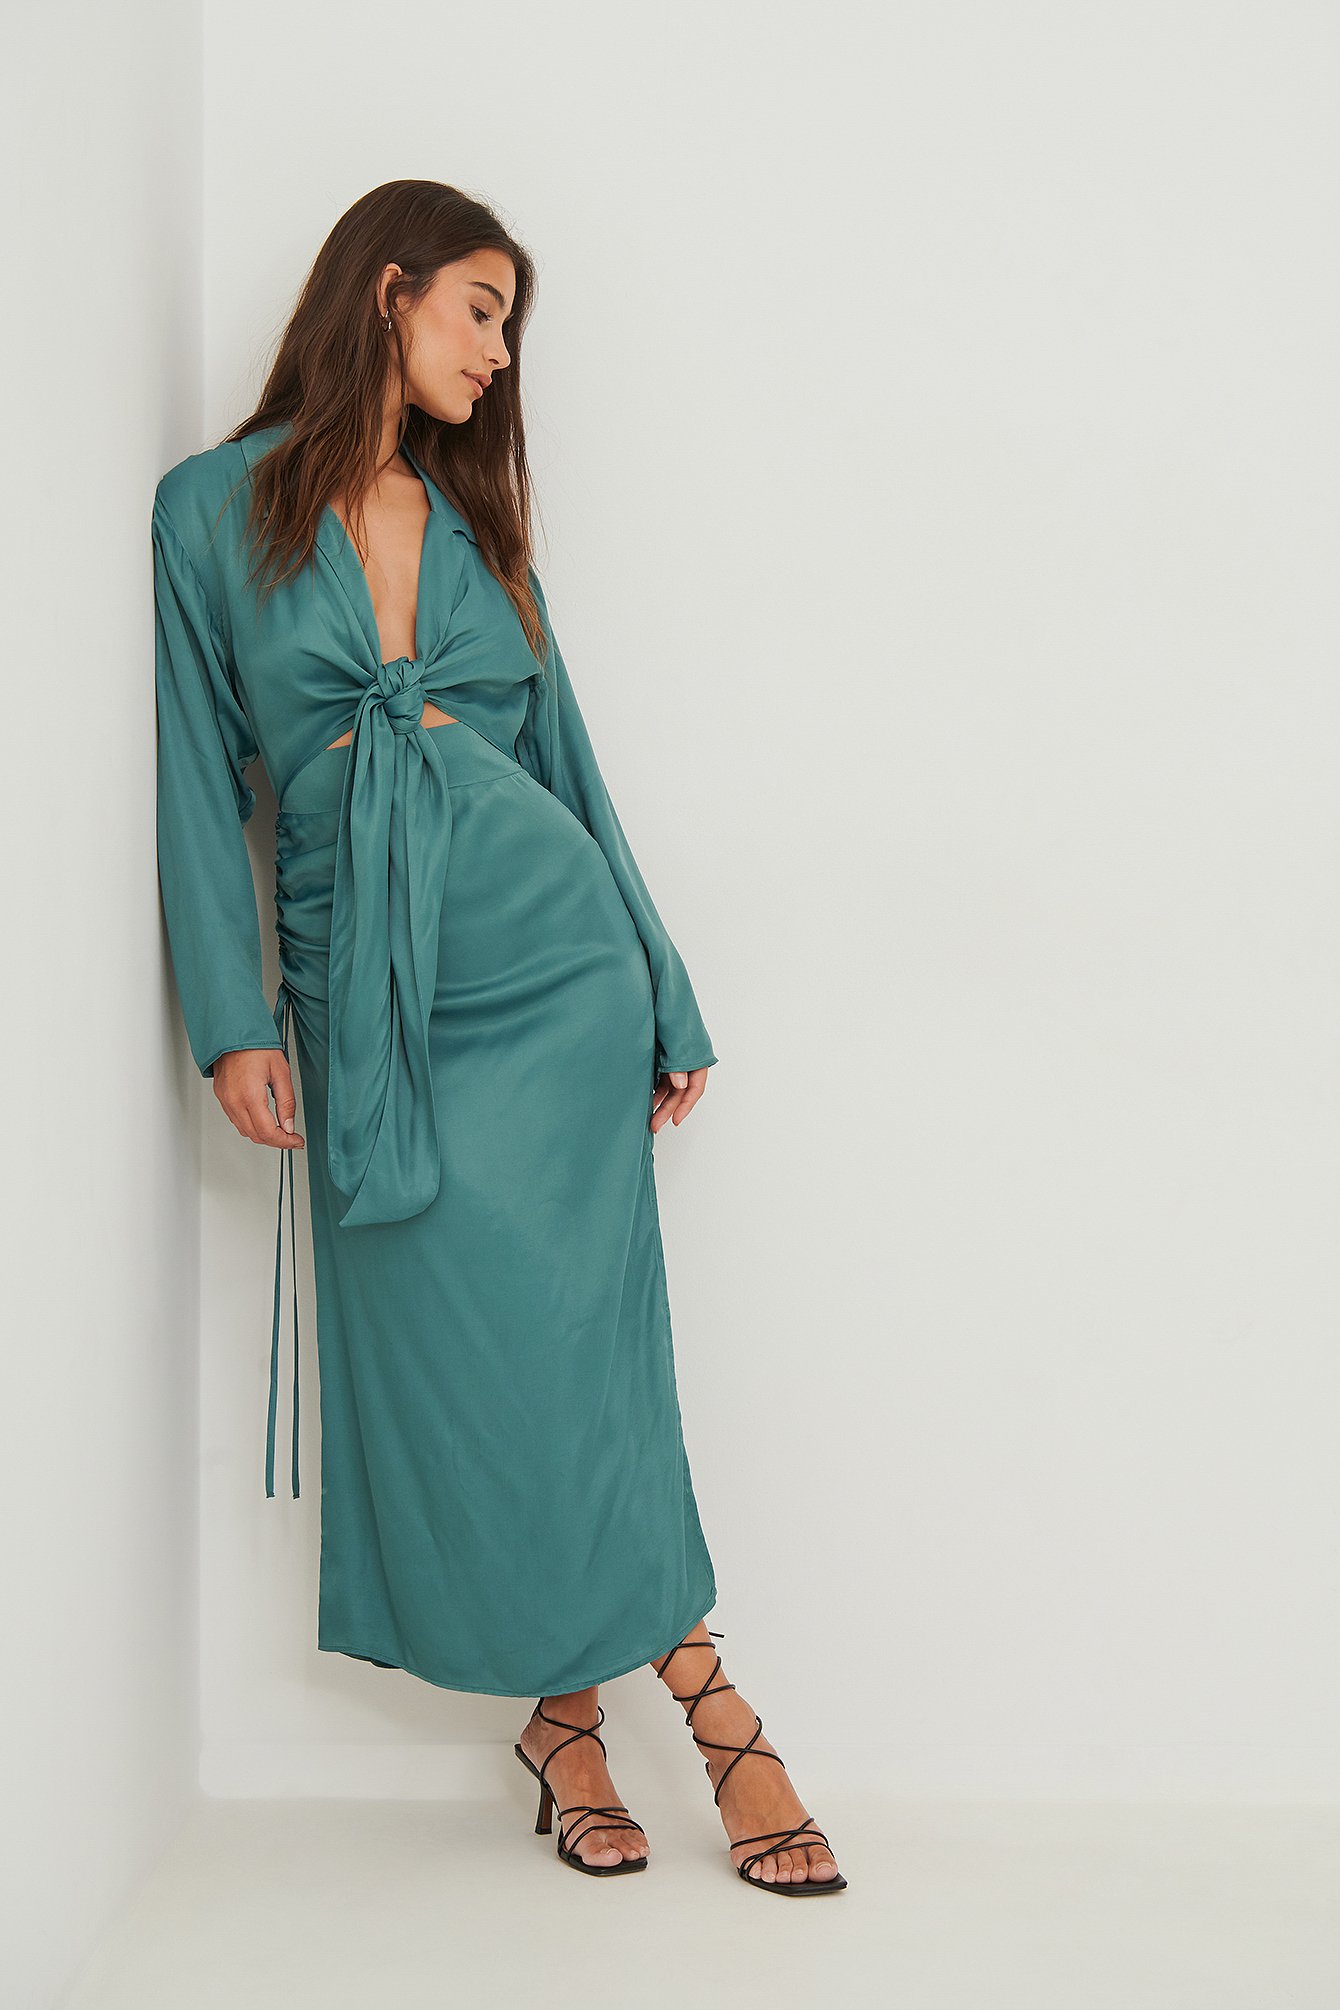 Tie Front Maxi Dress Outfit.